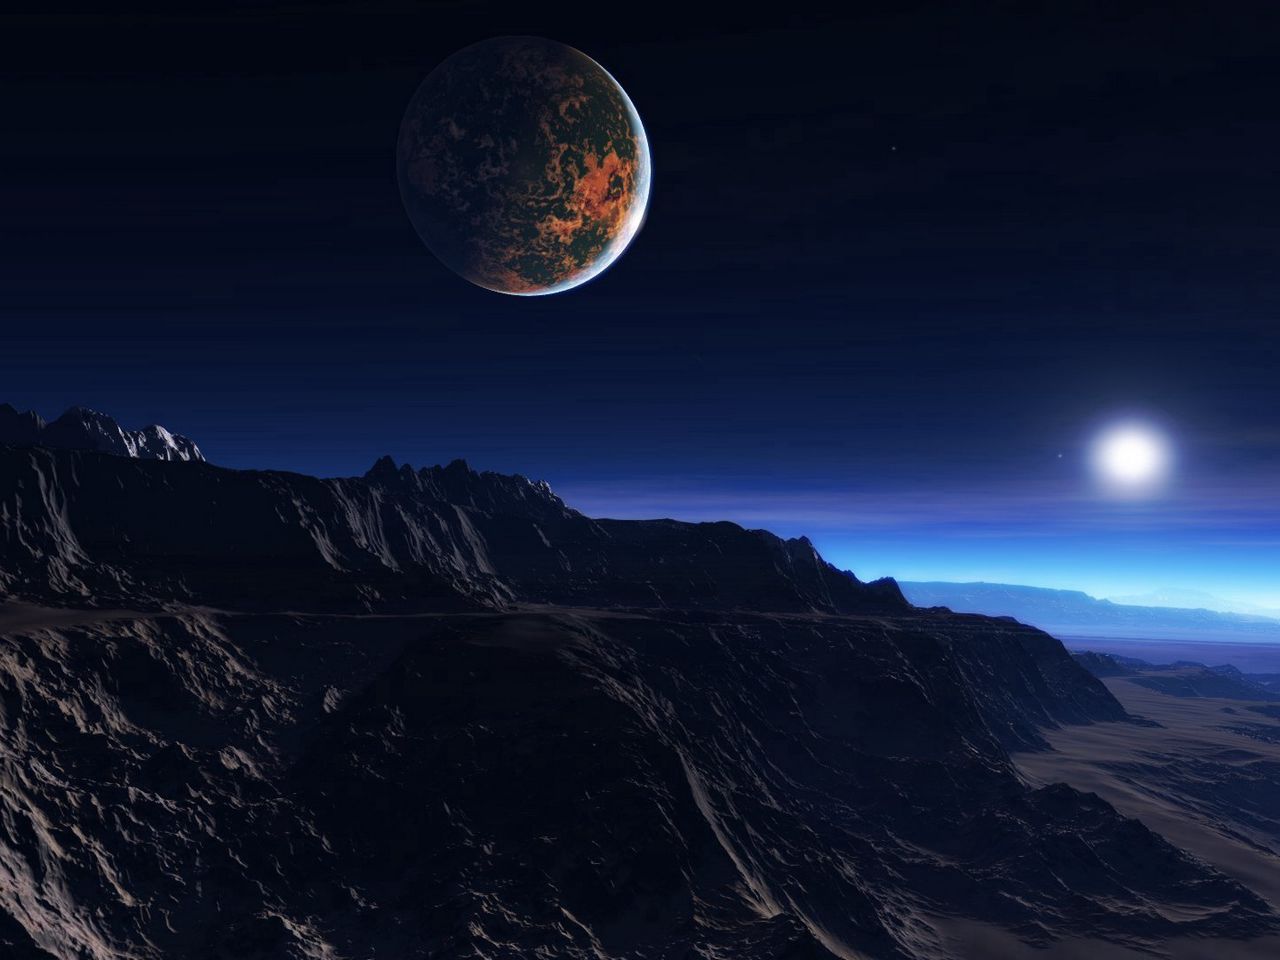 1280x960 Wallpaper exoplanet atmosphere, clouds, stars, moon, mist, mountains, rocks